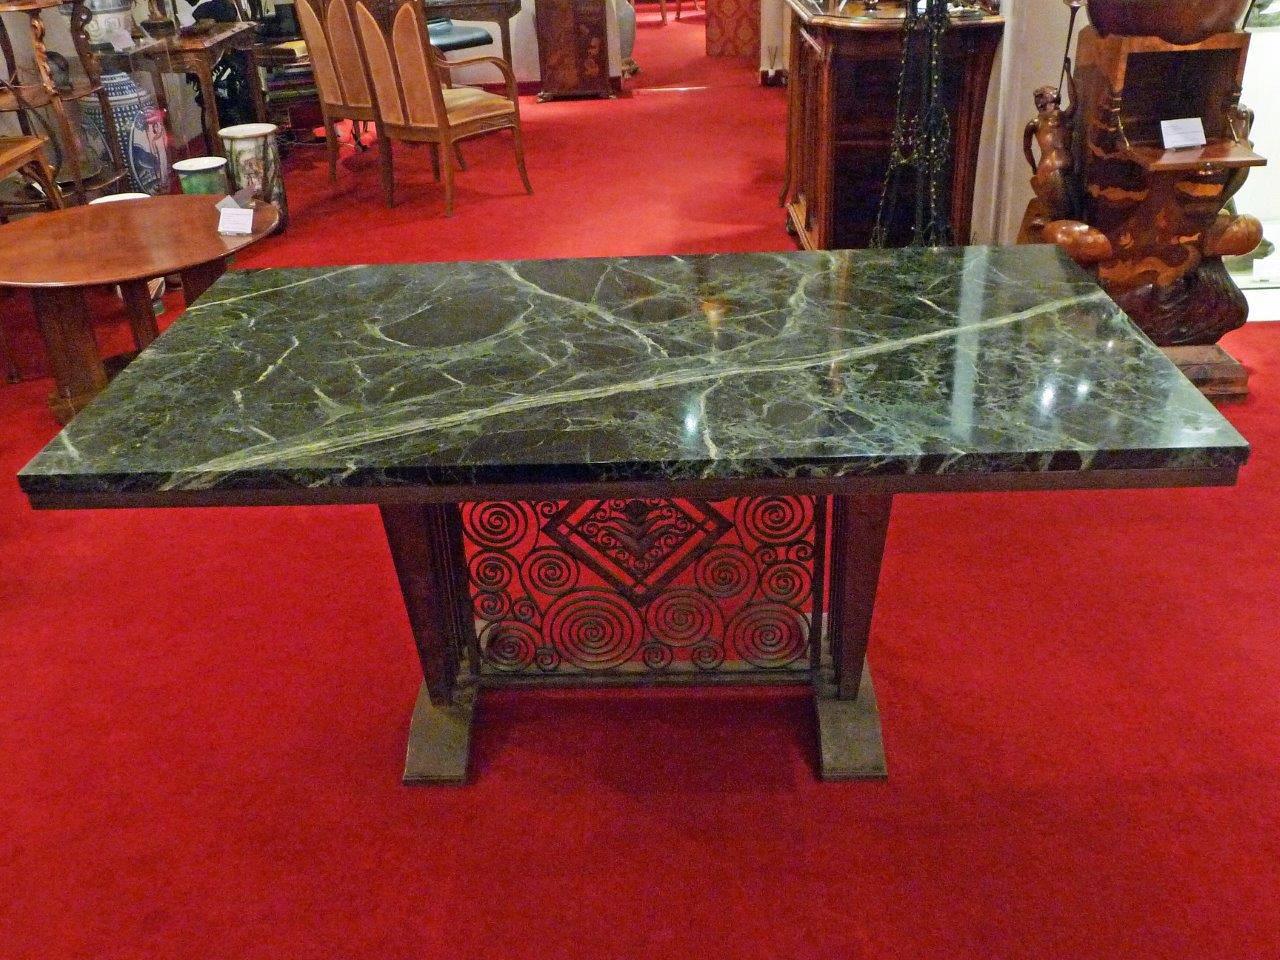 Edgar Brandt.
A green marble and wrought iron table.
Stamped E Brandt.